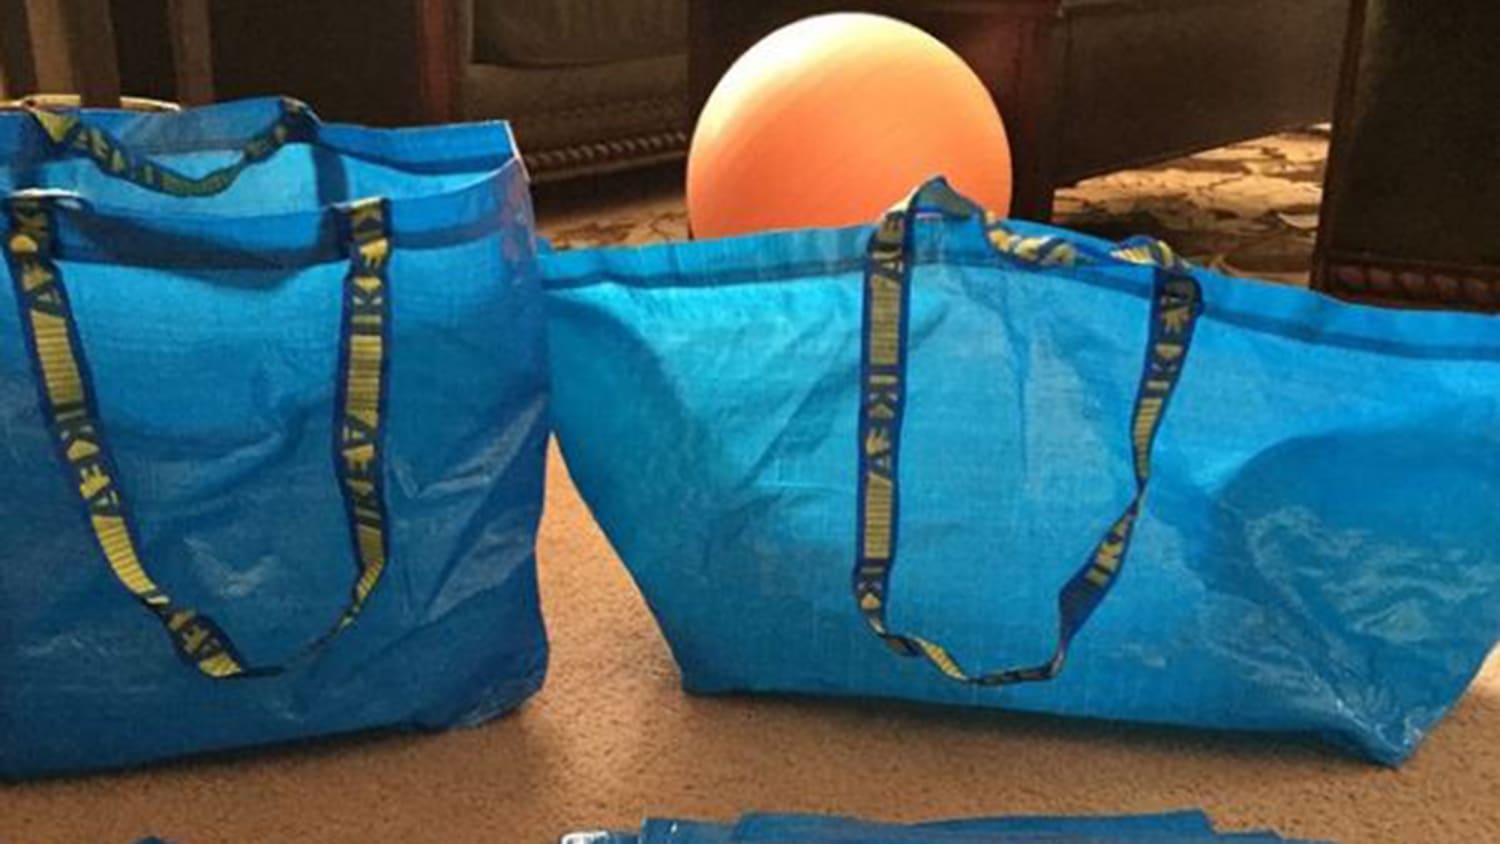 Which brand had the best response to Ikea's huge blue bag?